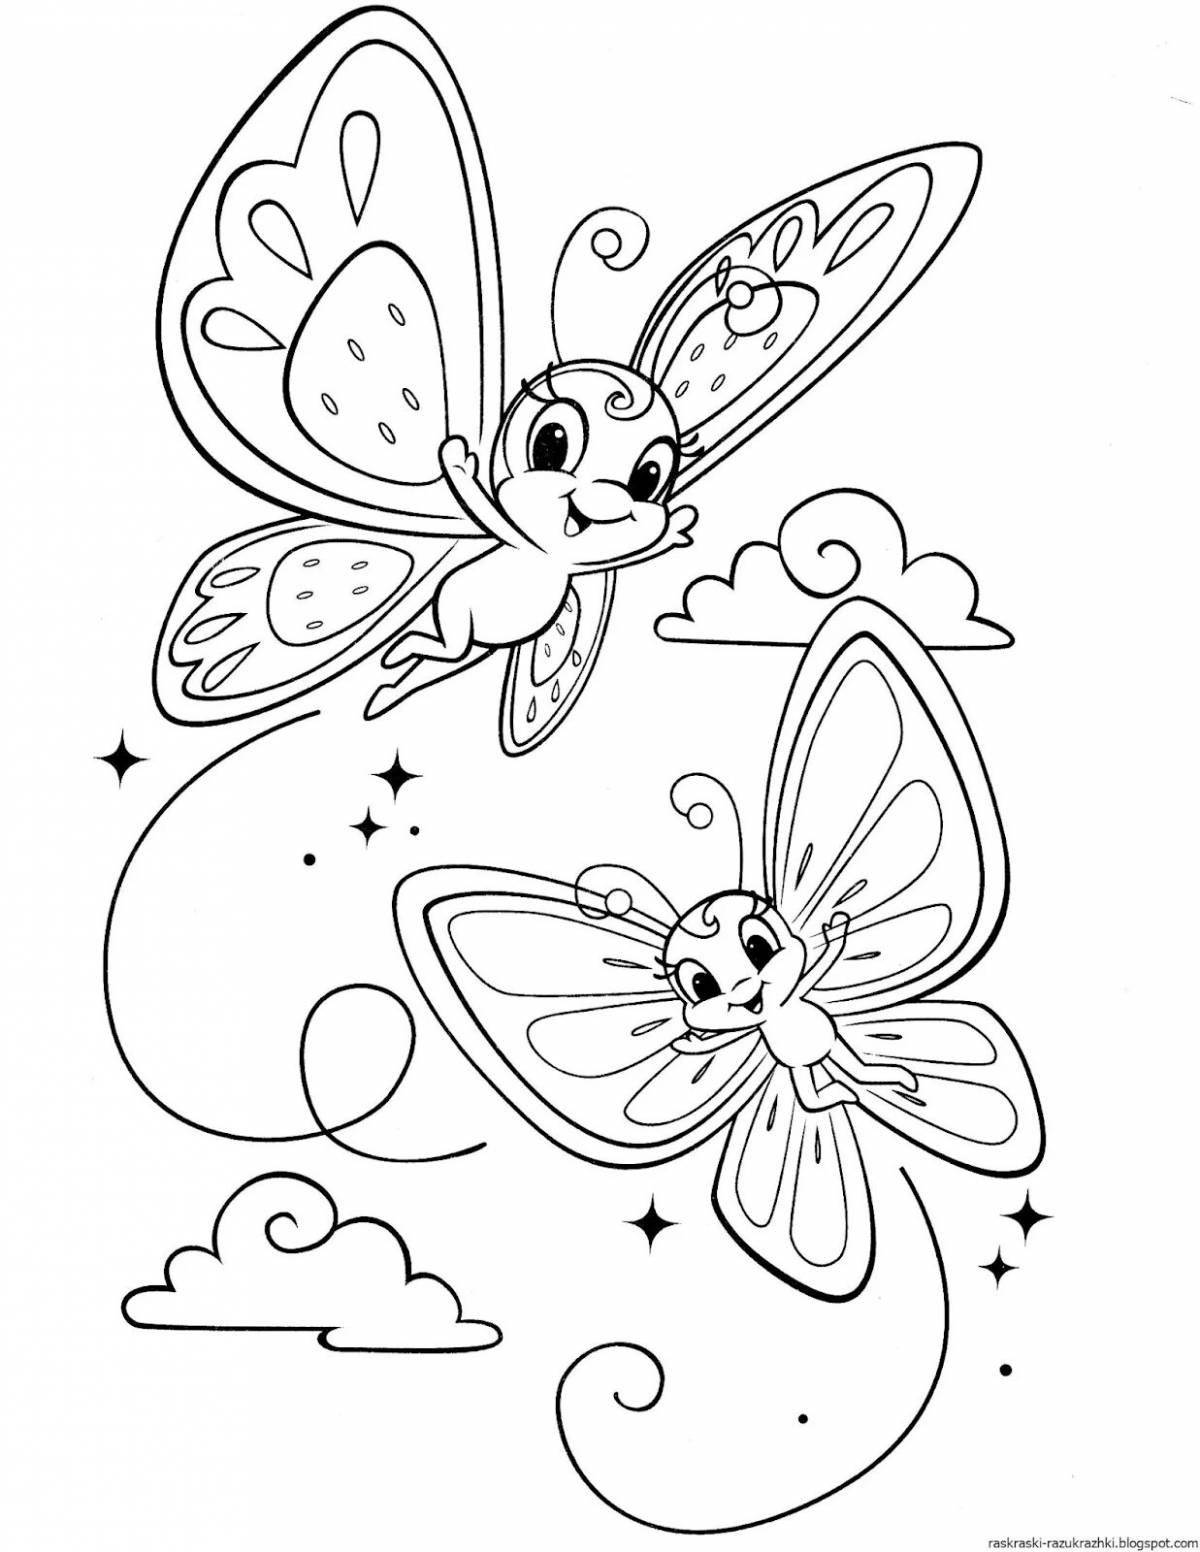 Glowing butterfly coloring book for children 4-5 years old